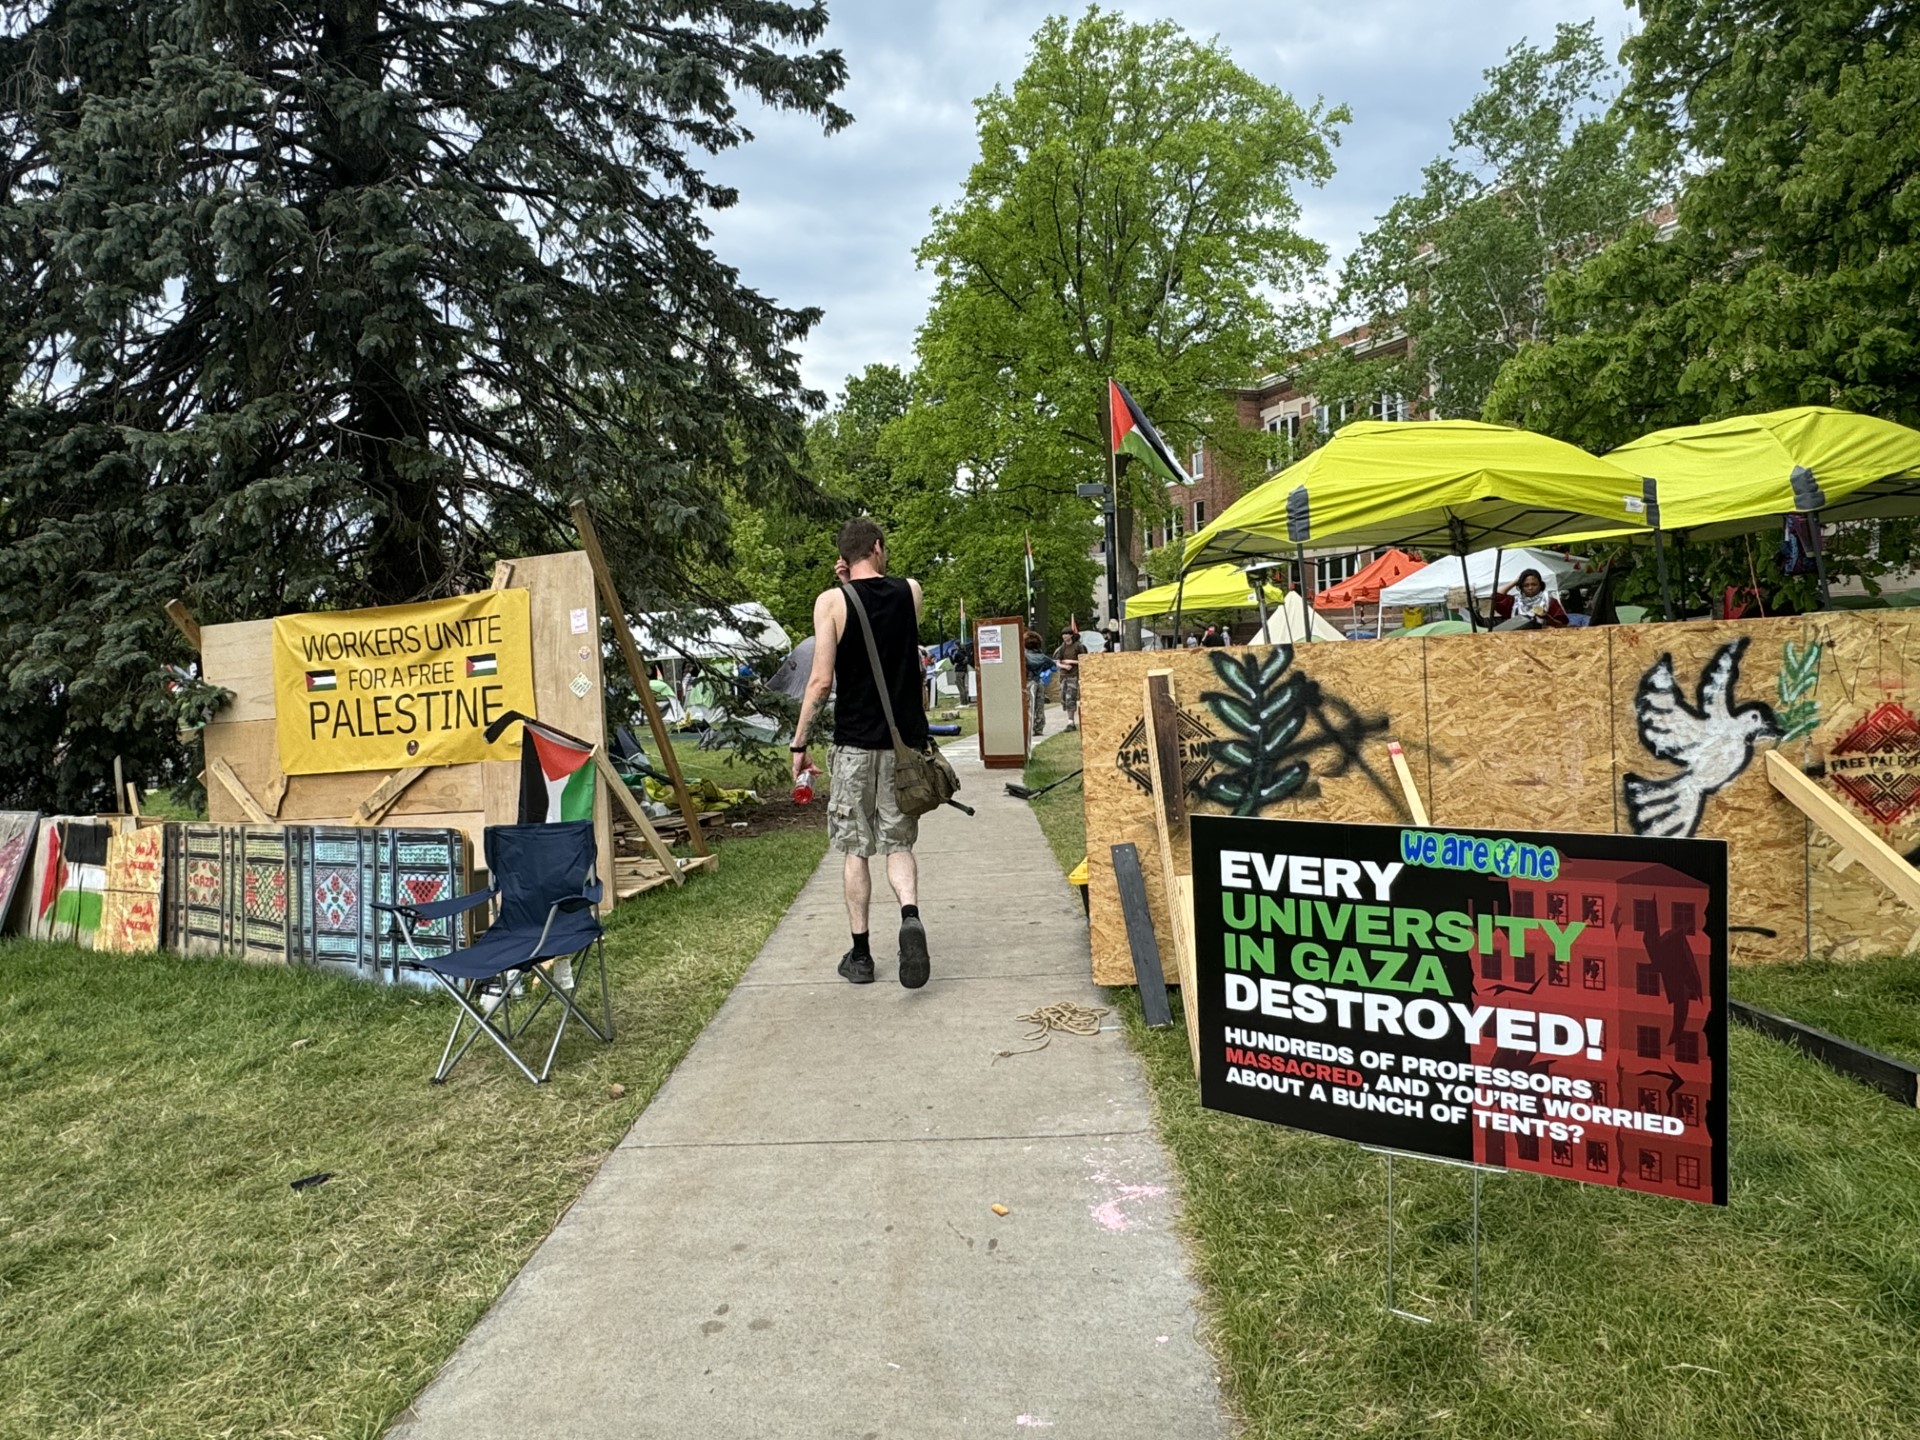 UW-Milwaukee, protesters reach agreement to end pro-Palestinian encampment